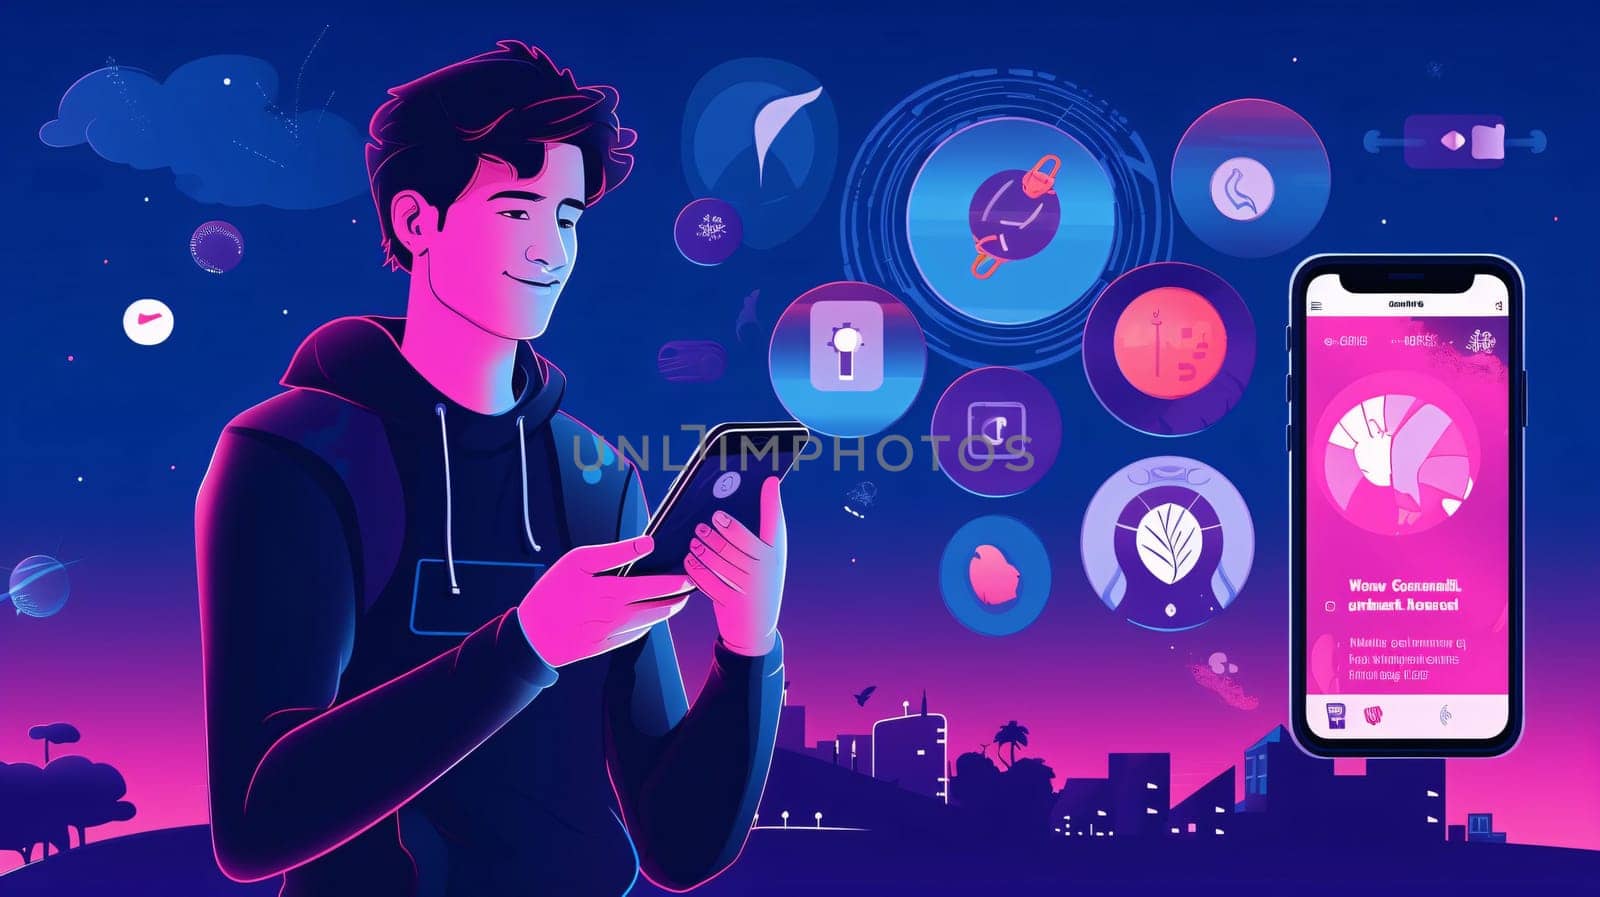 Smartphone screen: Vector illustration of a young man with a smartphone in his hands.